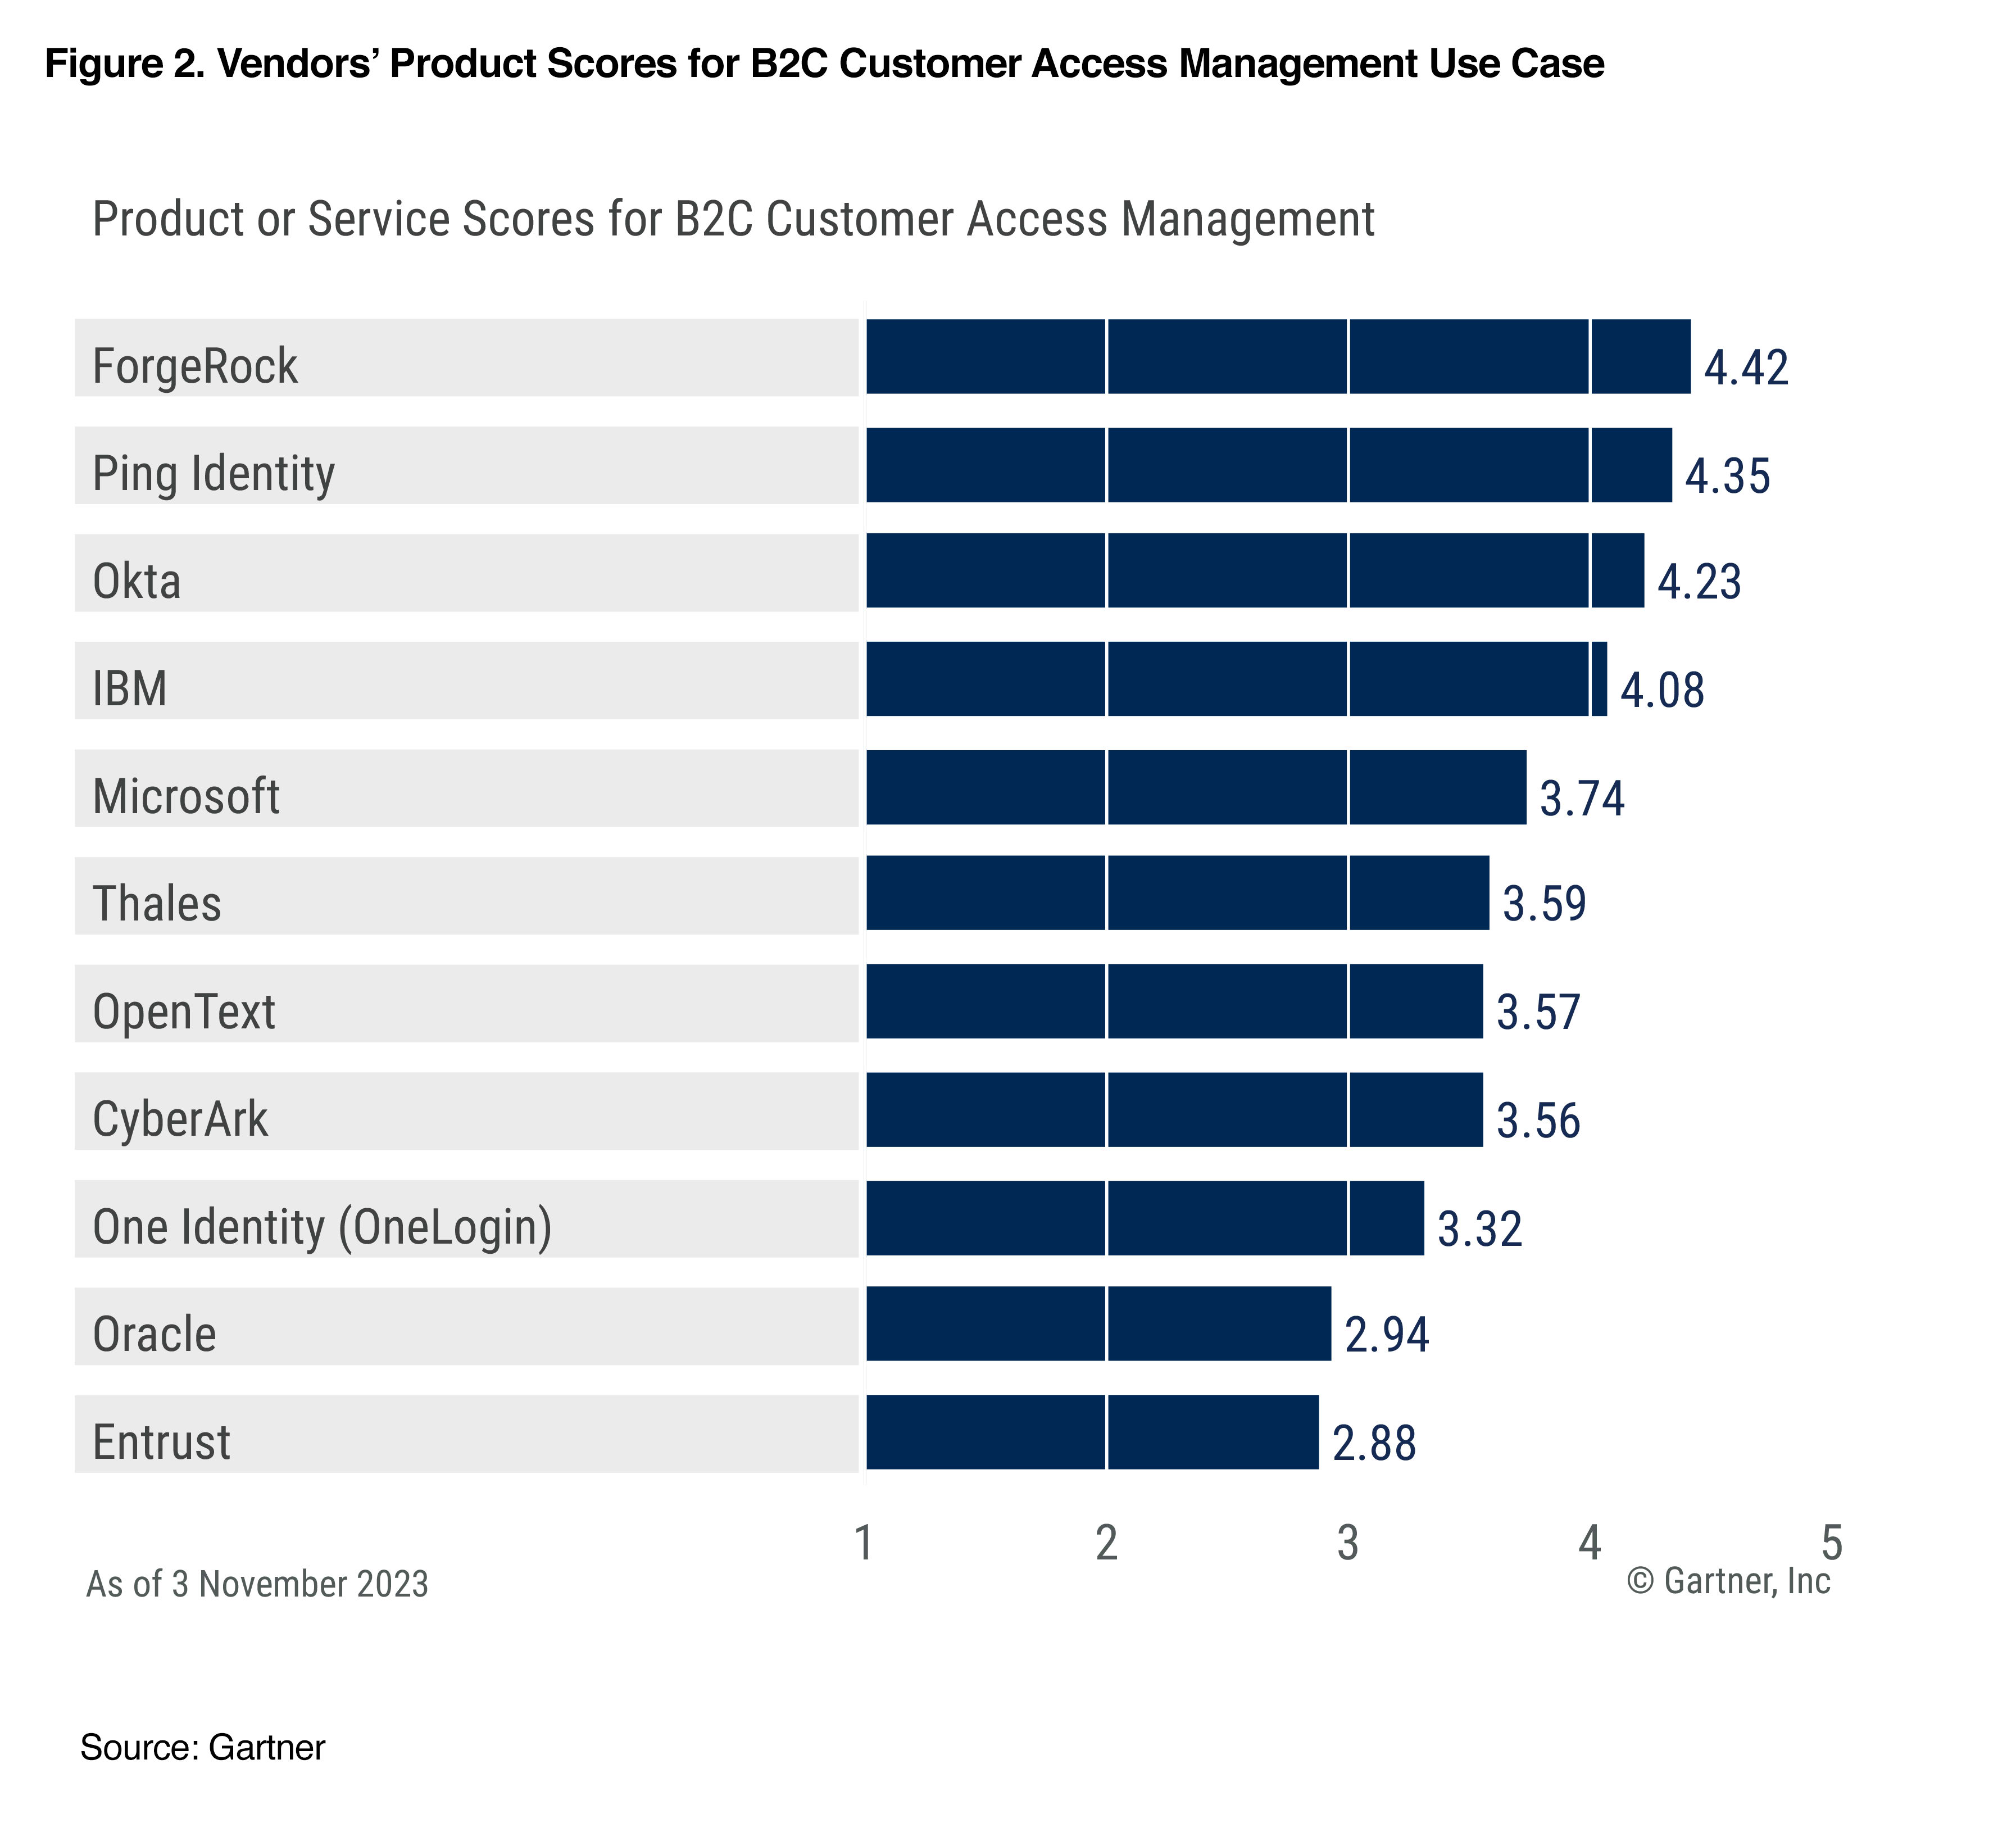 Vendors’ Product Scores for B2C Customer Access Management Use Case bar graph